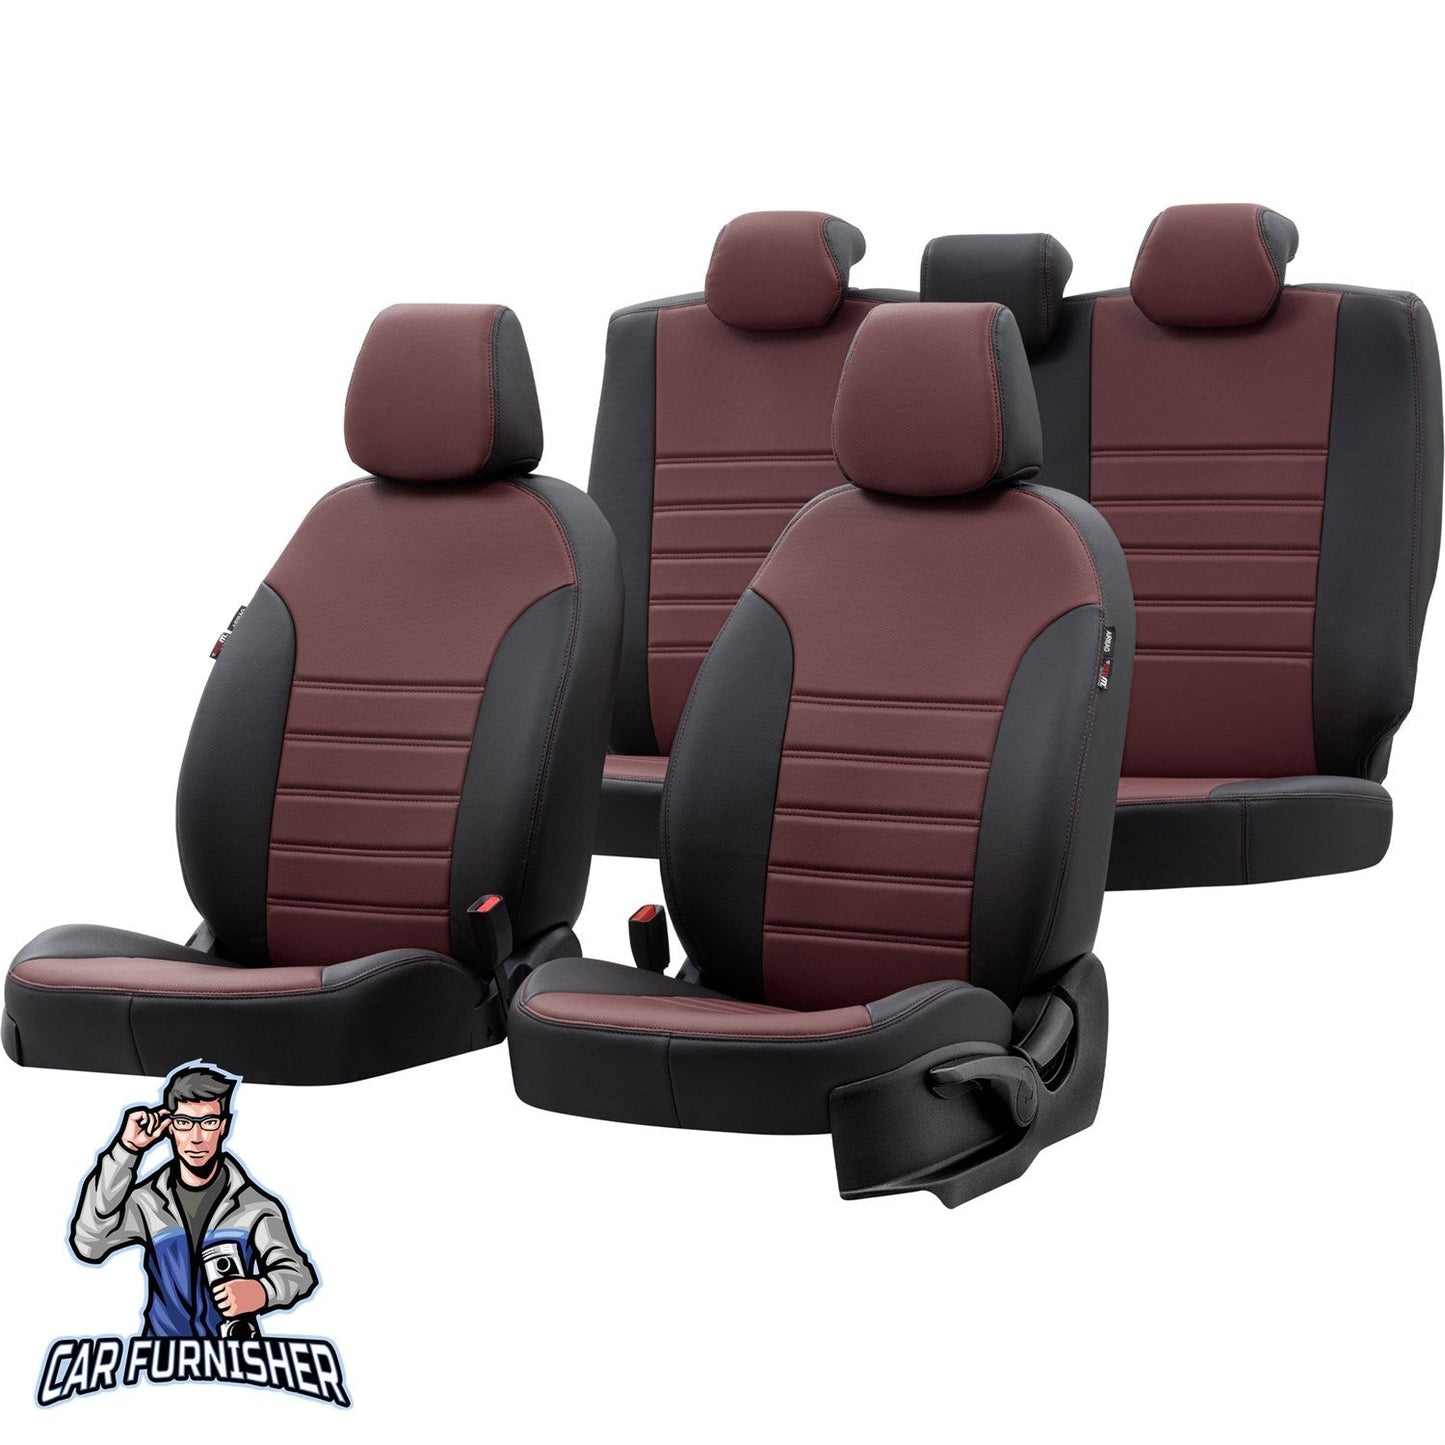 Seat Toledo Seat Covers Istanbul Leather Design Burgundy Leather